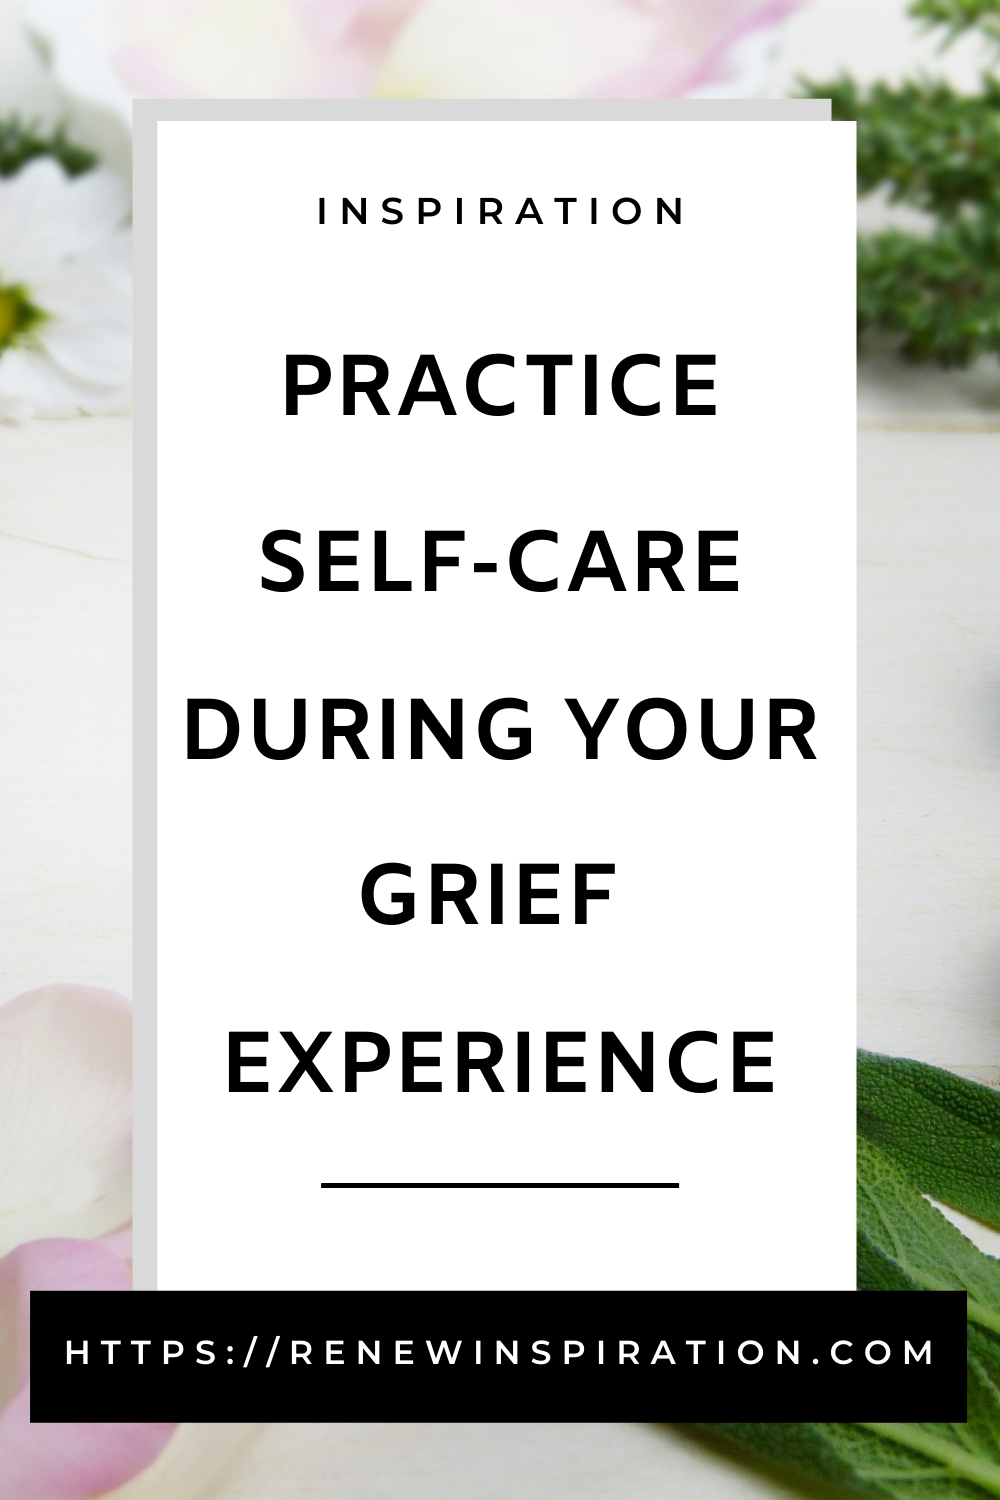 Renew Inspiration, Practice Self-Care During Your Grief Experience